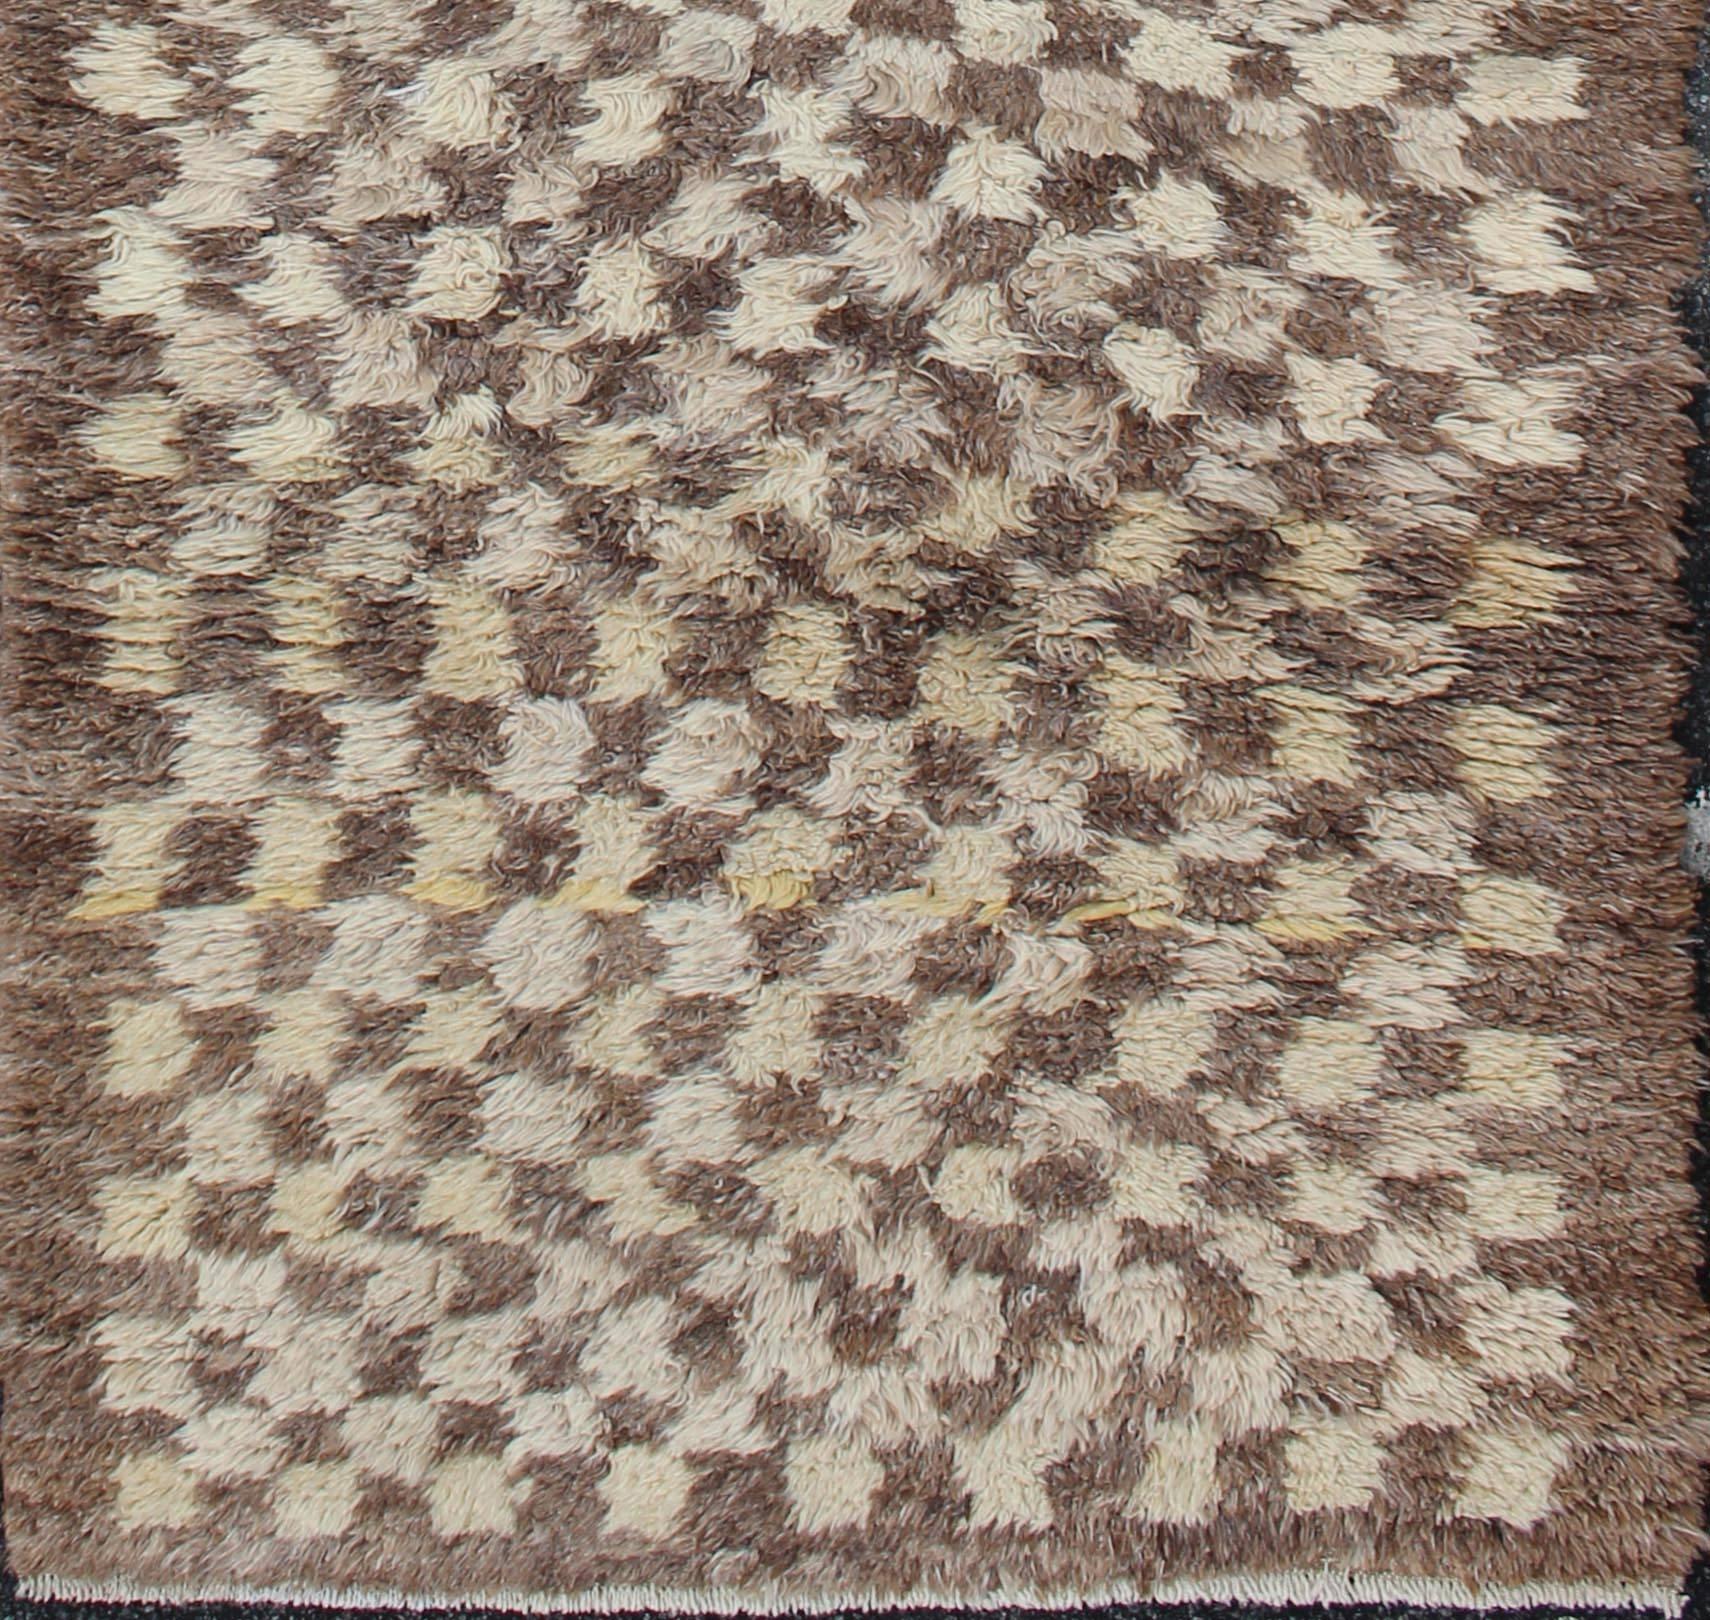 Vintage Turkish Tulu Rug with Shaggy Pile & Checkerboard Pattern.
This Turkish Tulu rug from mid-20th century is a naturally-dyed wool has high shaggy pile with checkerboard pattern.
Measures: 2'9 x 8'1.